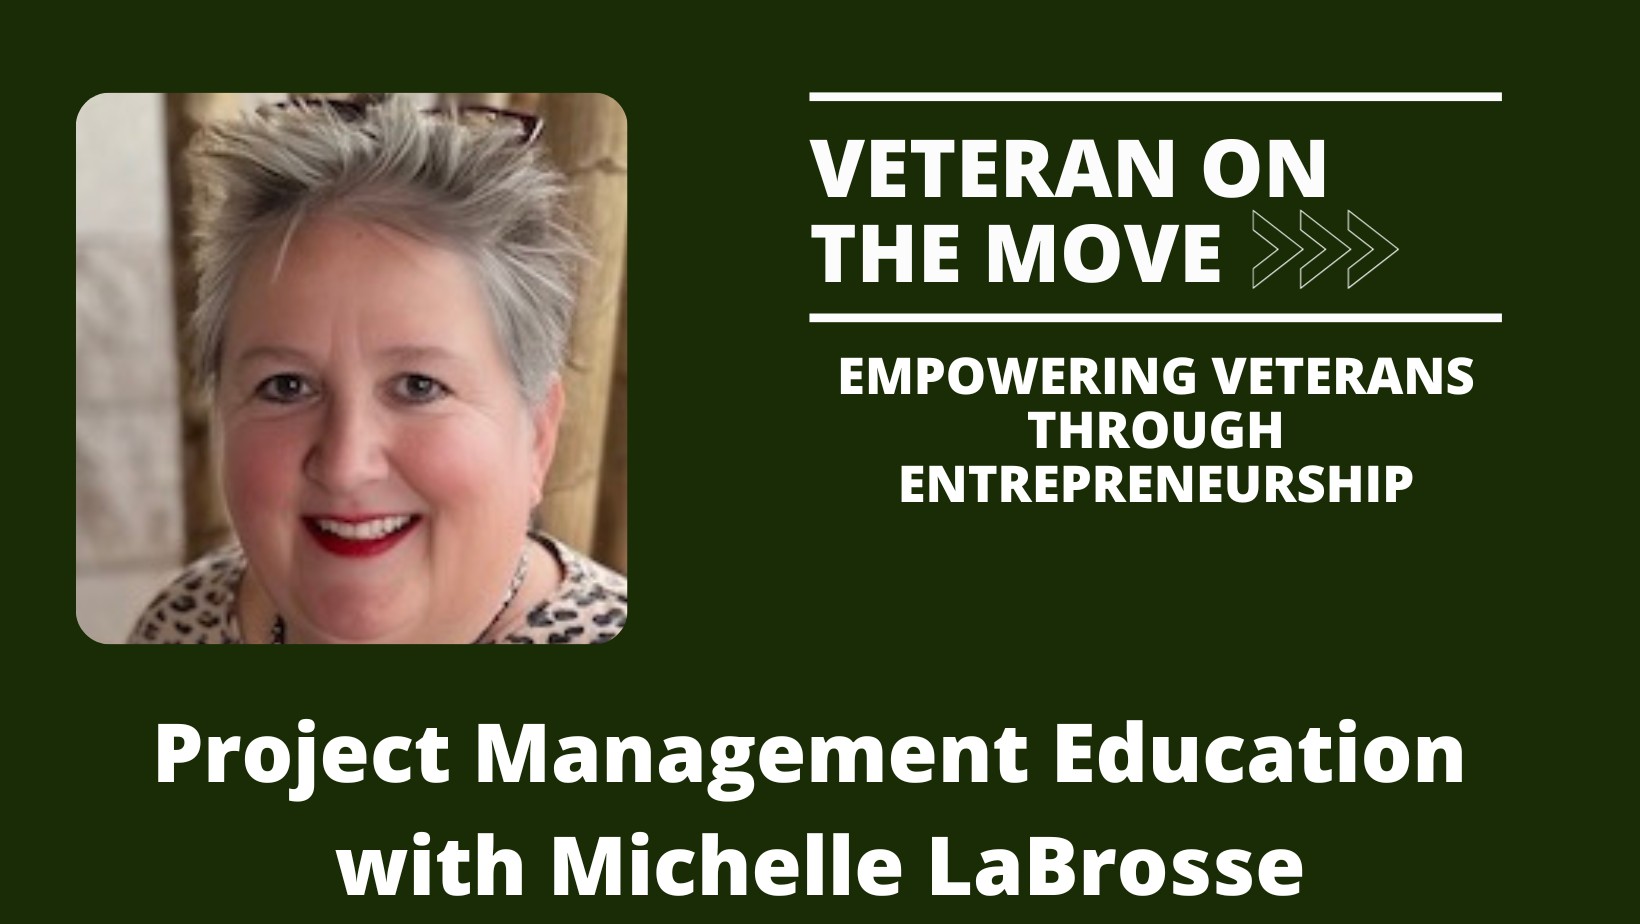 Project Management Education with Michelle LaBrosse